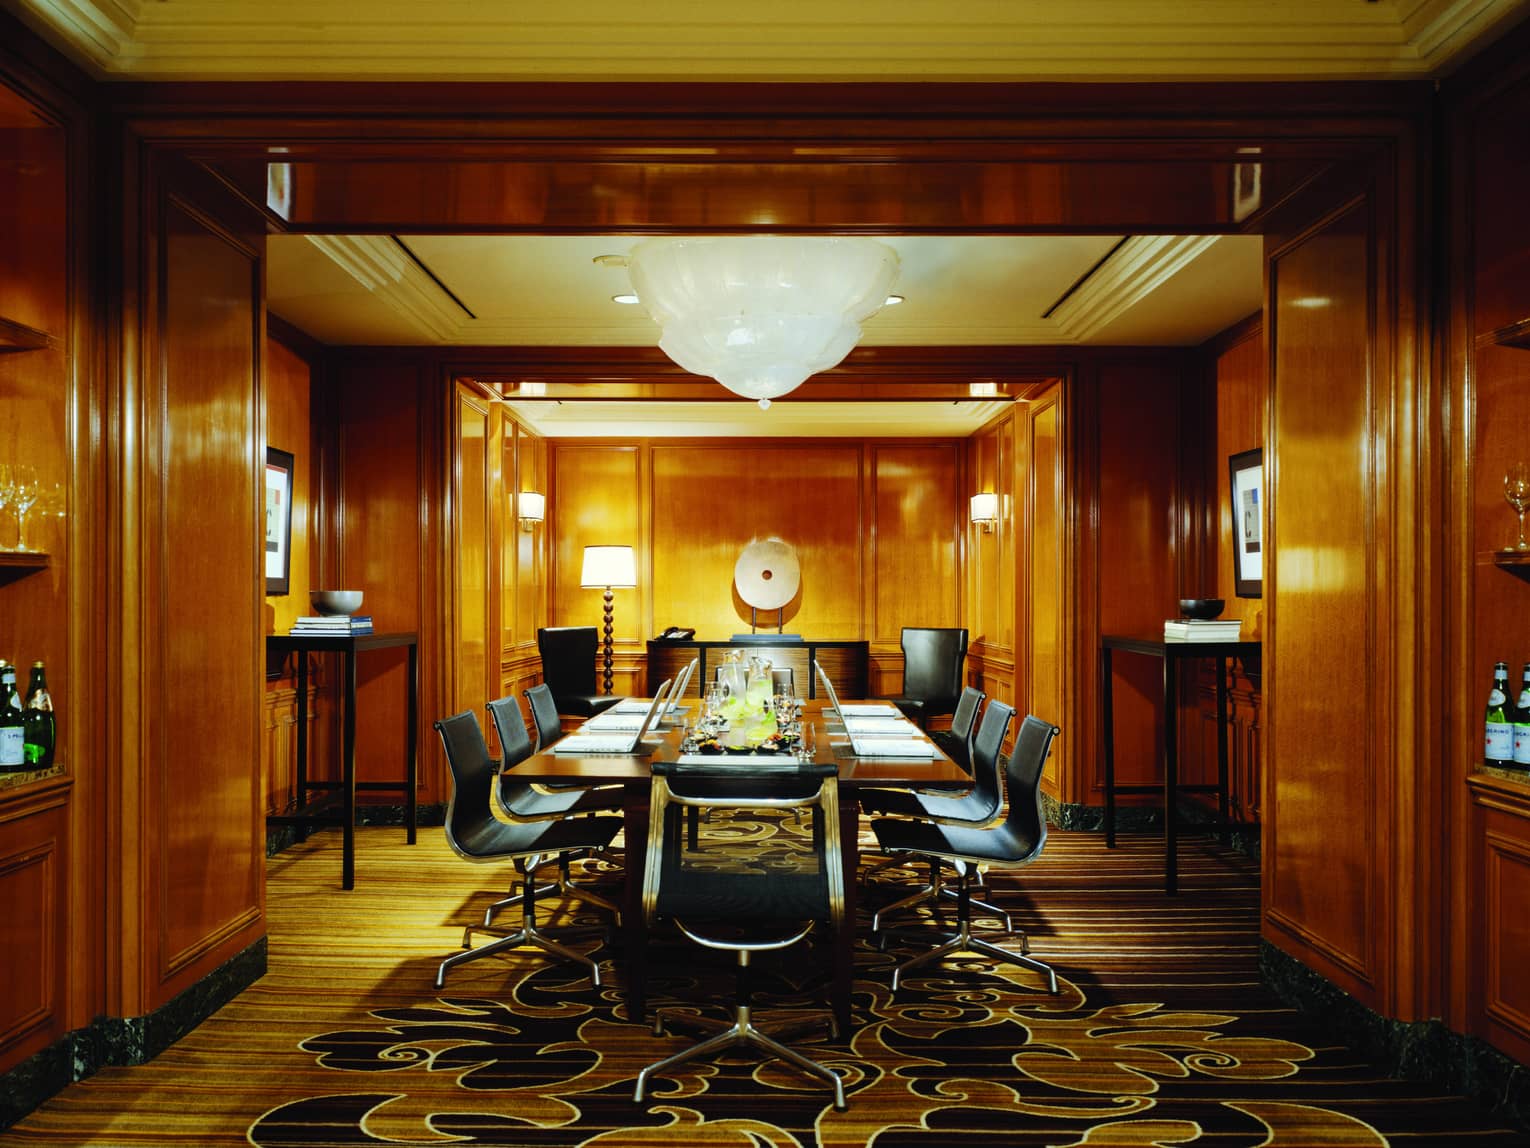 Long meeting table in Chateau Room with wood panel walls